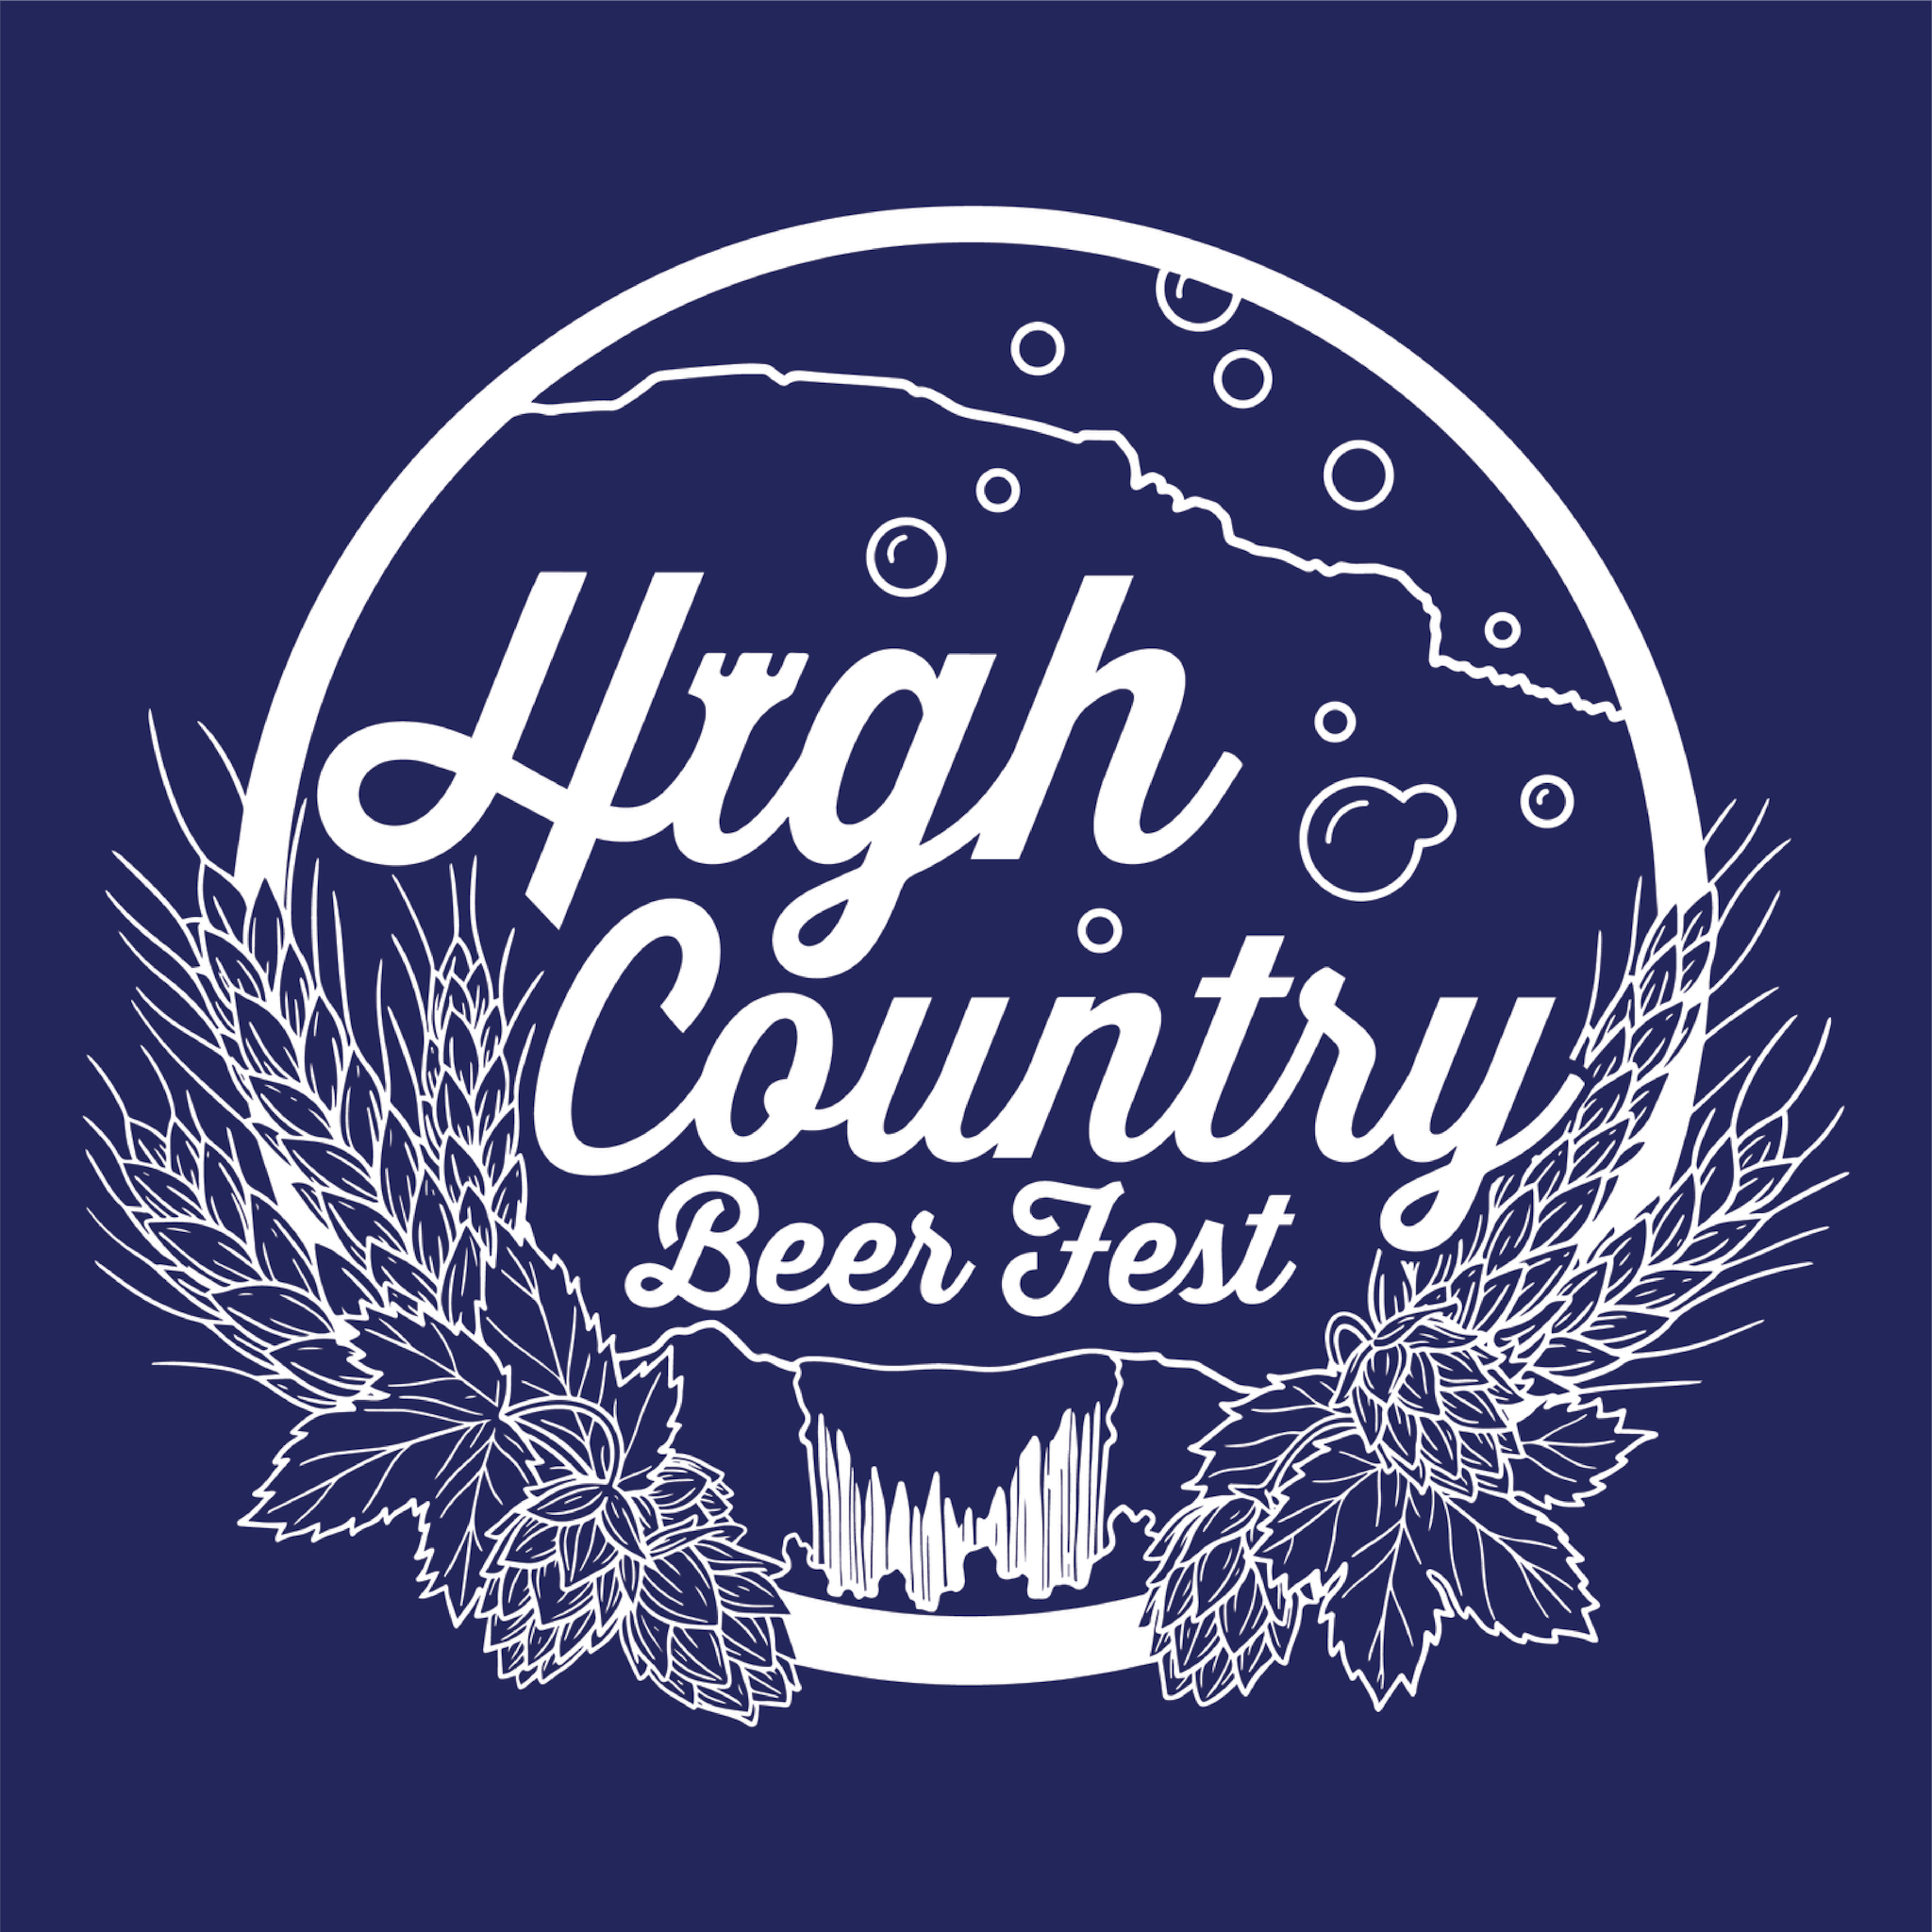 Protagonist High Country Beer Fest